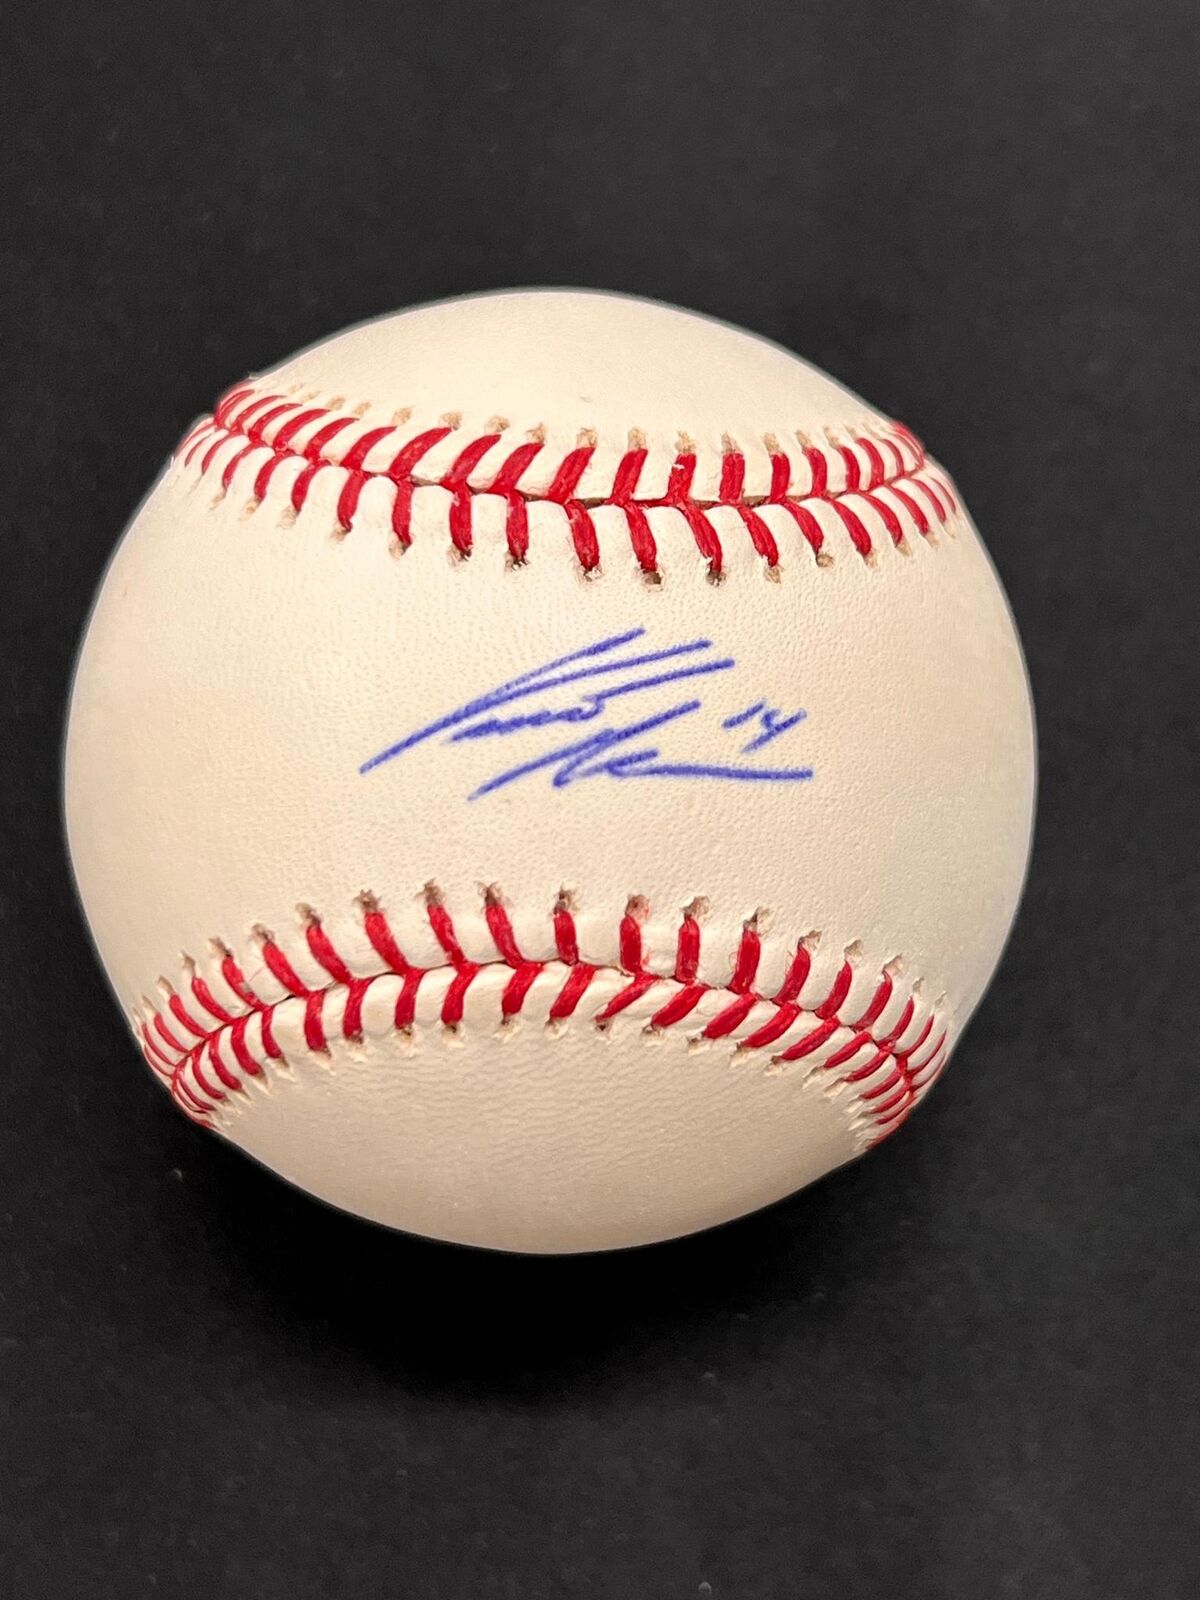 Curtis Granderson signed Rawlings baseball PSA/DNA autographed ball